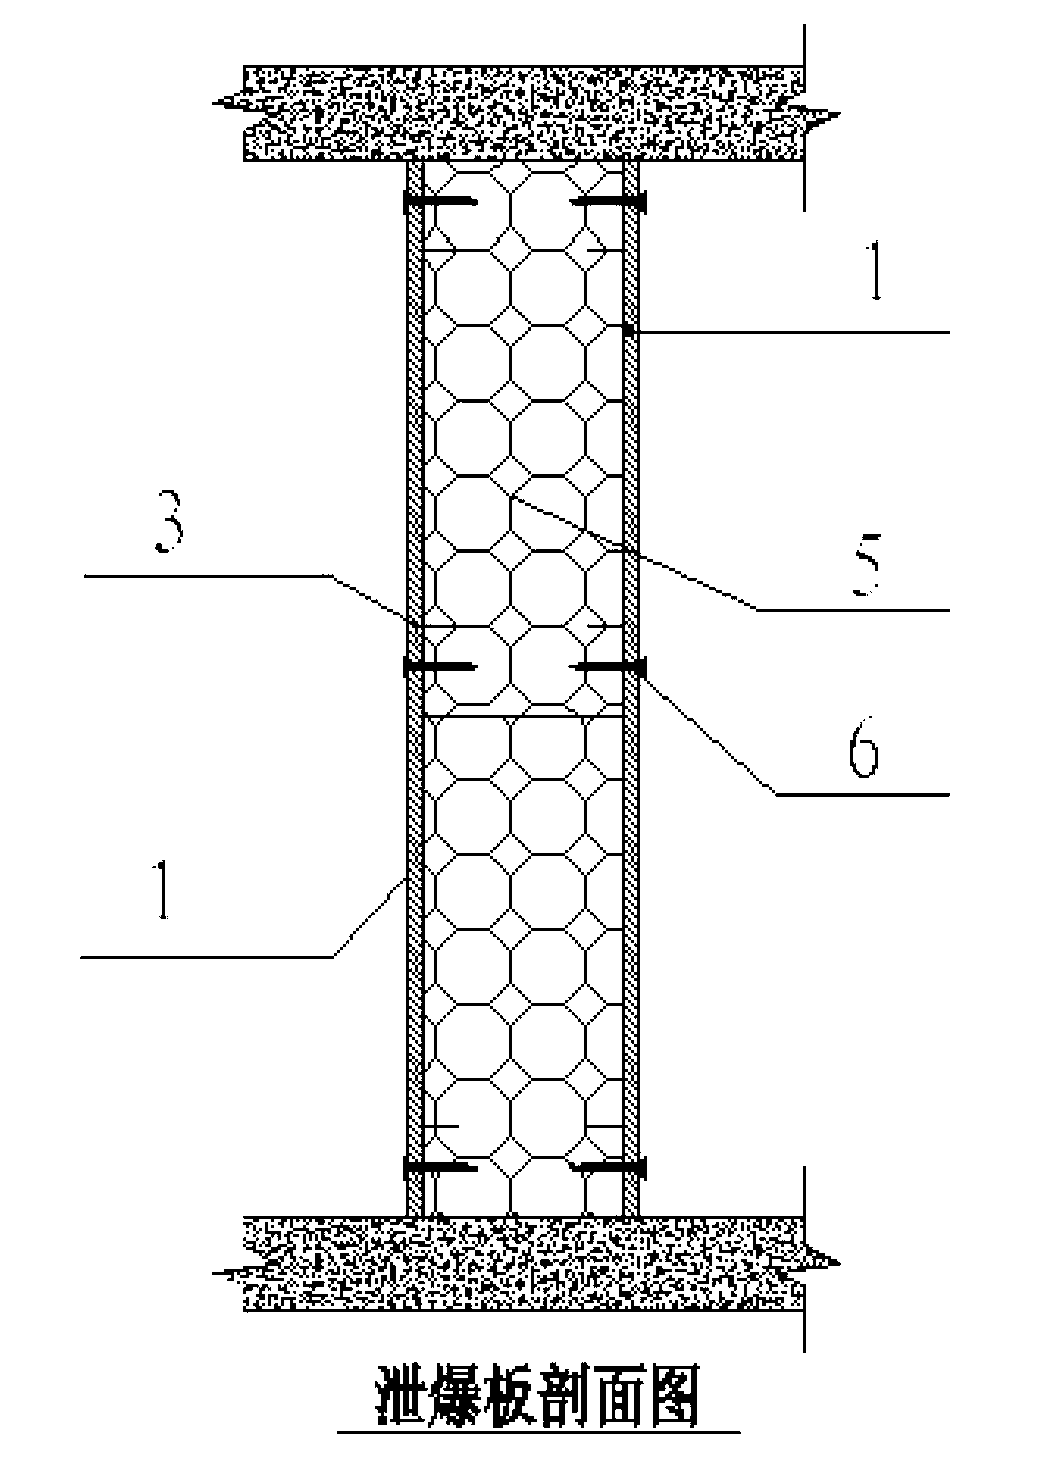 Method for reducing destructive force of explosion and explosion venting device